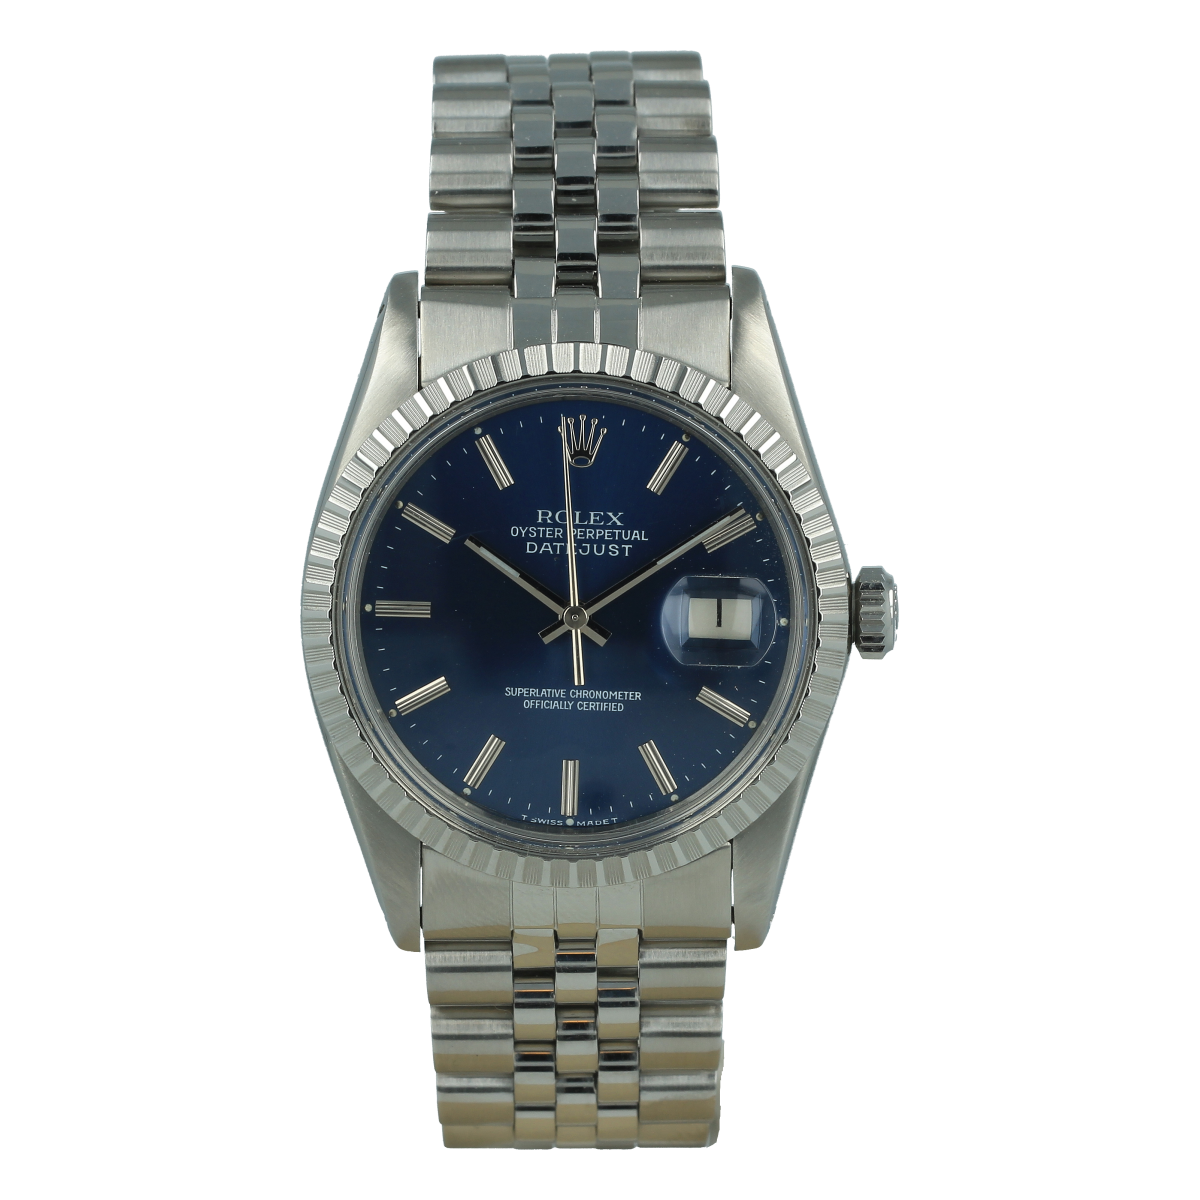 Rolex Datejust 16030 Blue Dial | Buy pre-owned Rolex watch